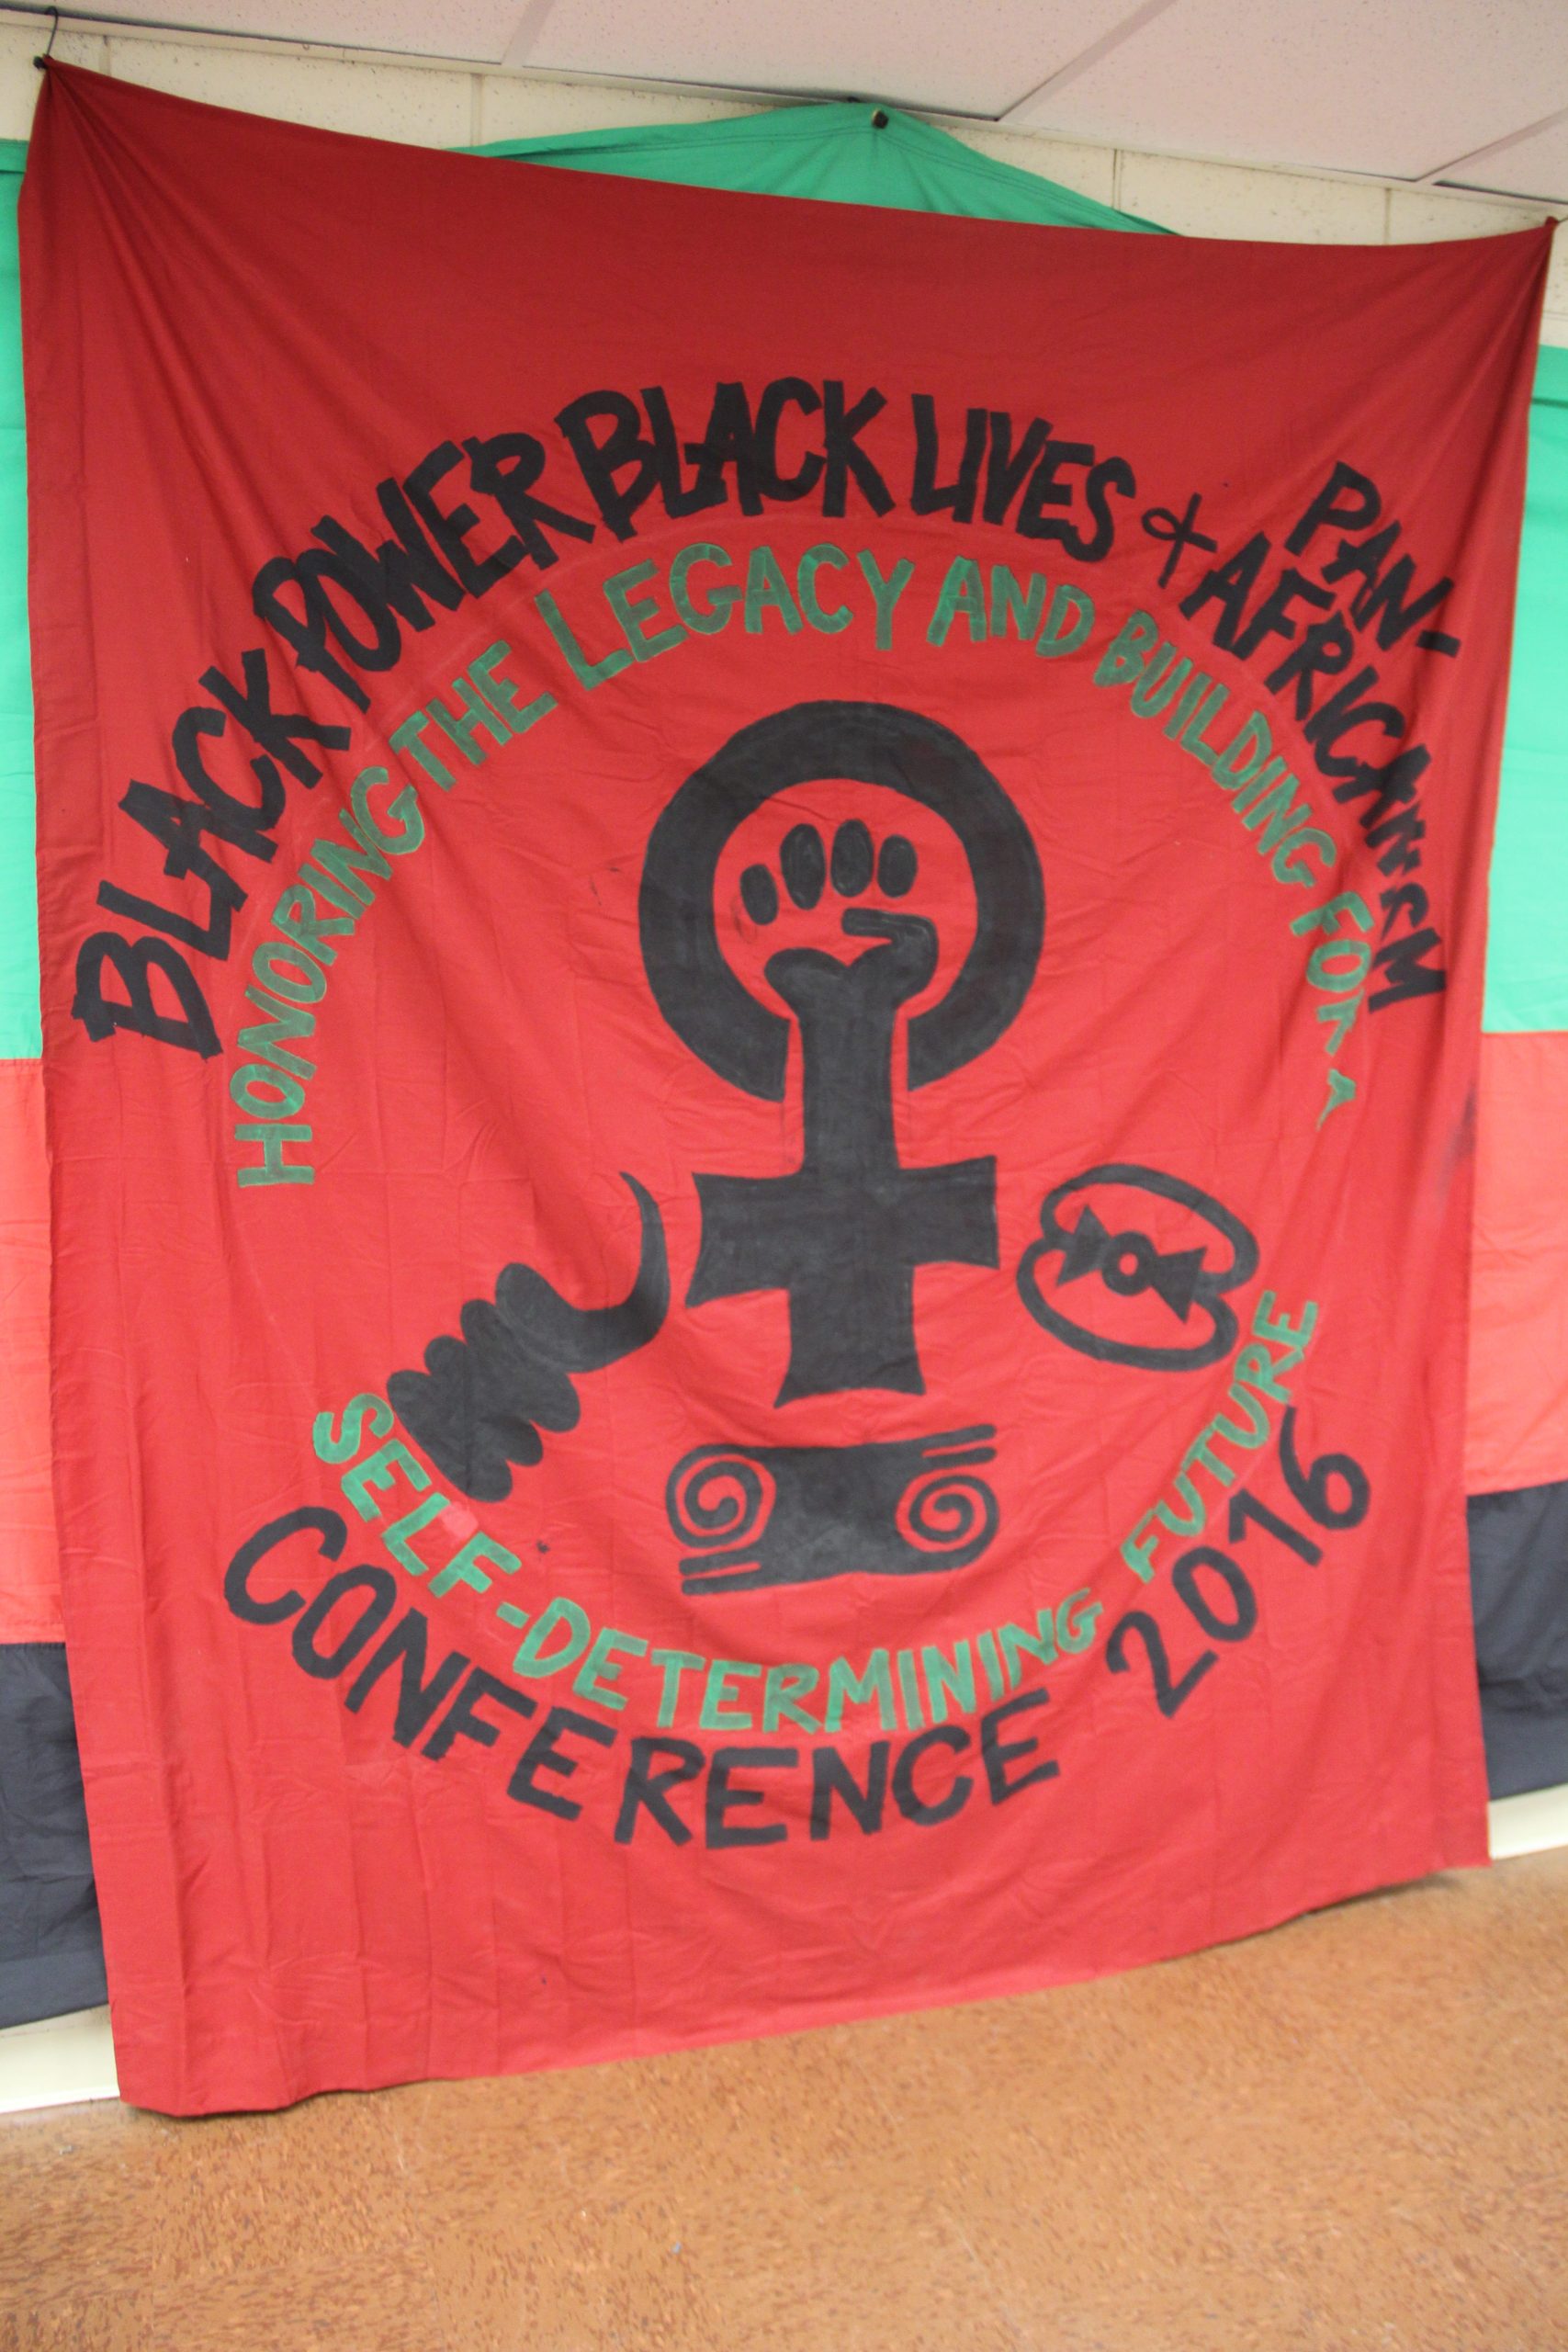 Black Power, Black Lives and Pan-Africanism Conference Banner June 16, 2016.